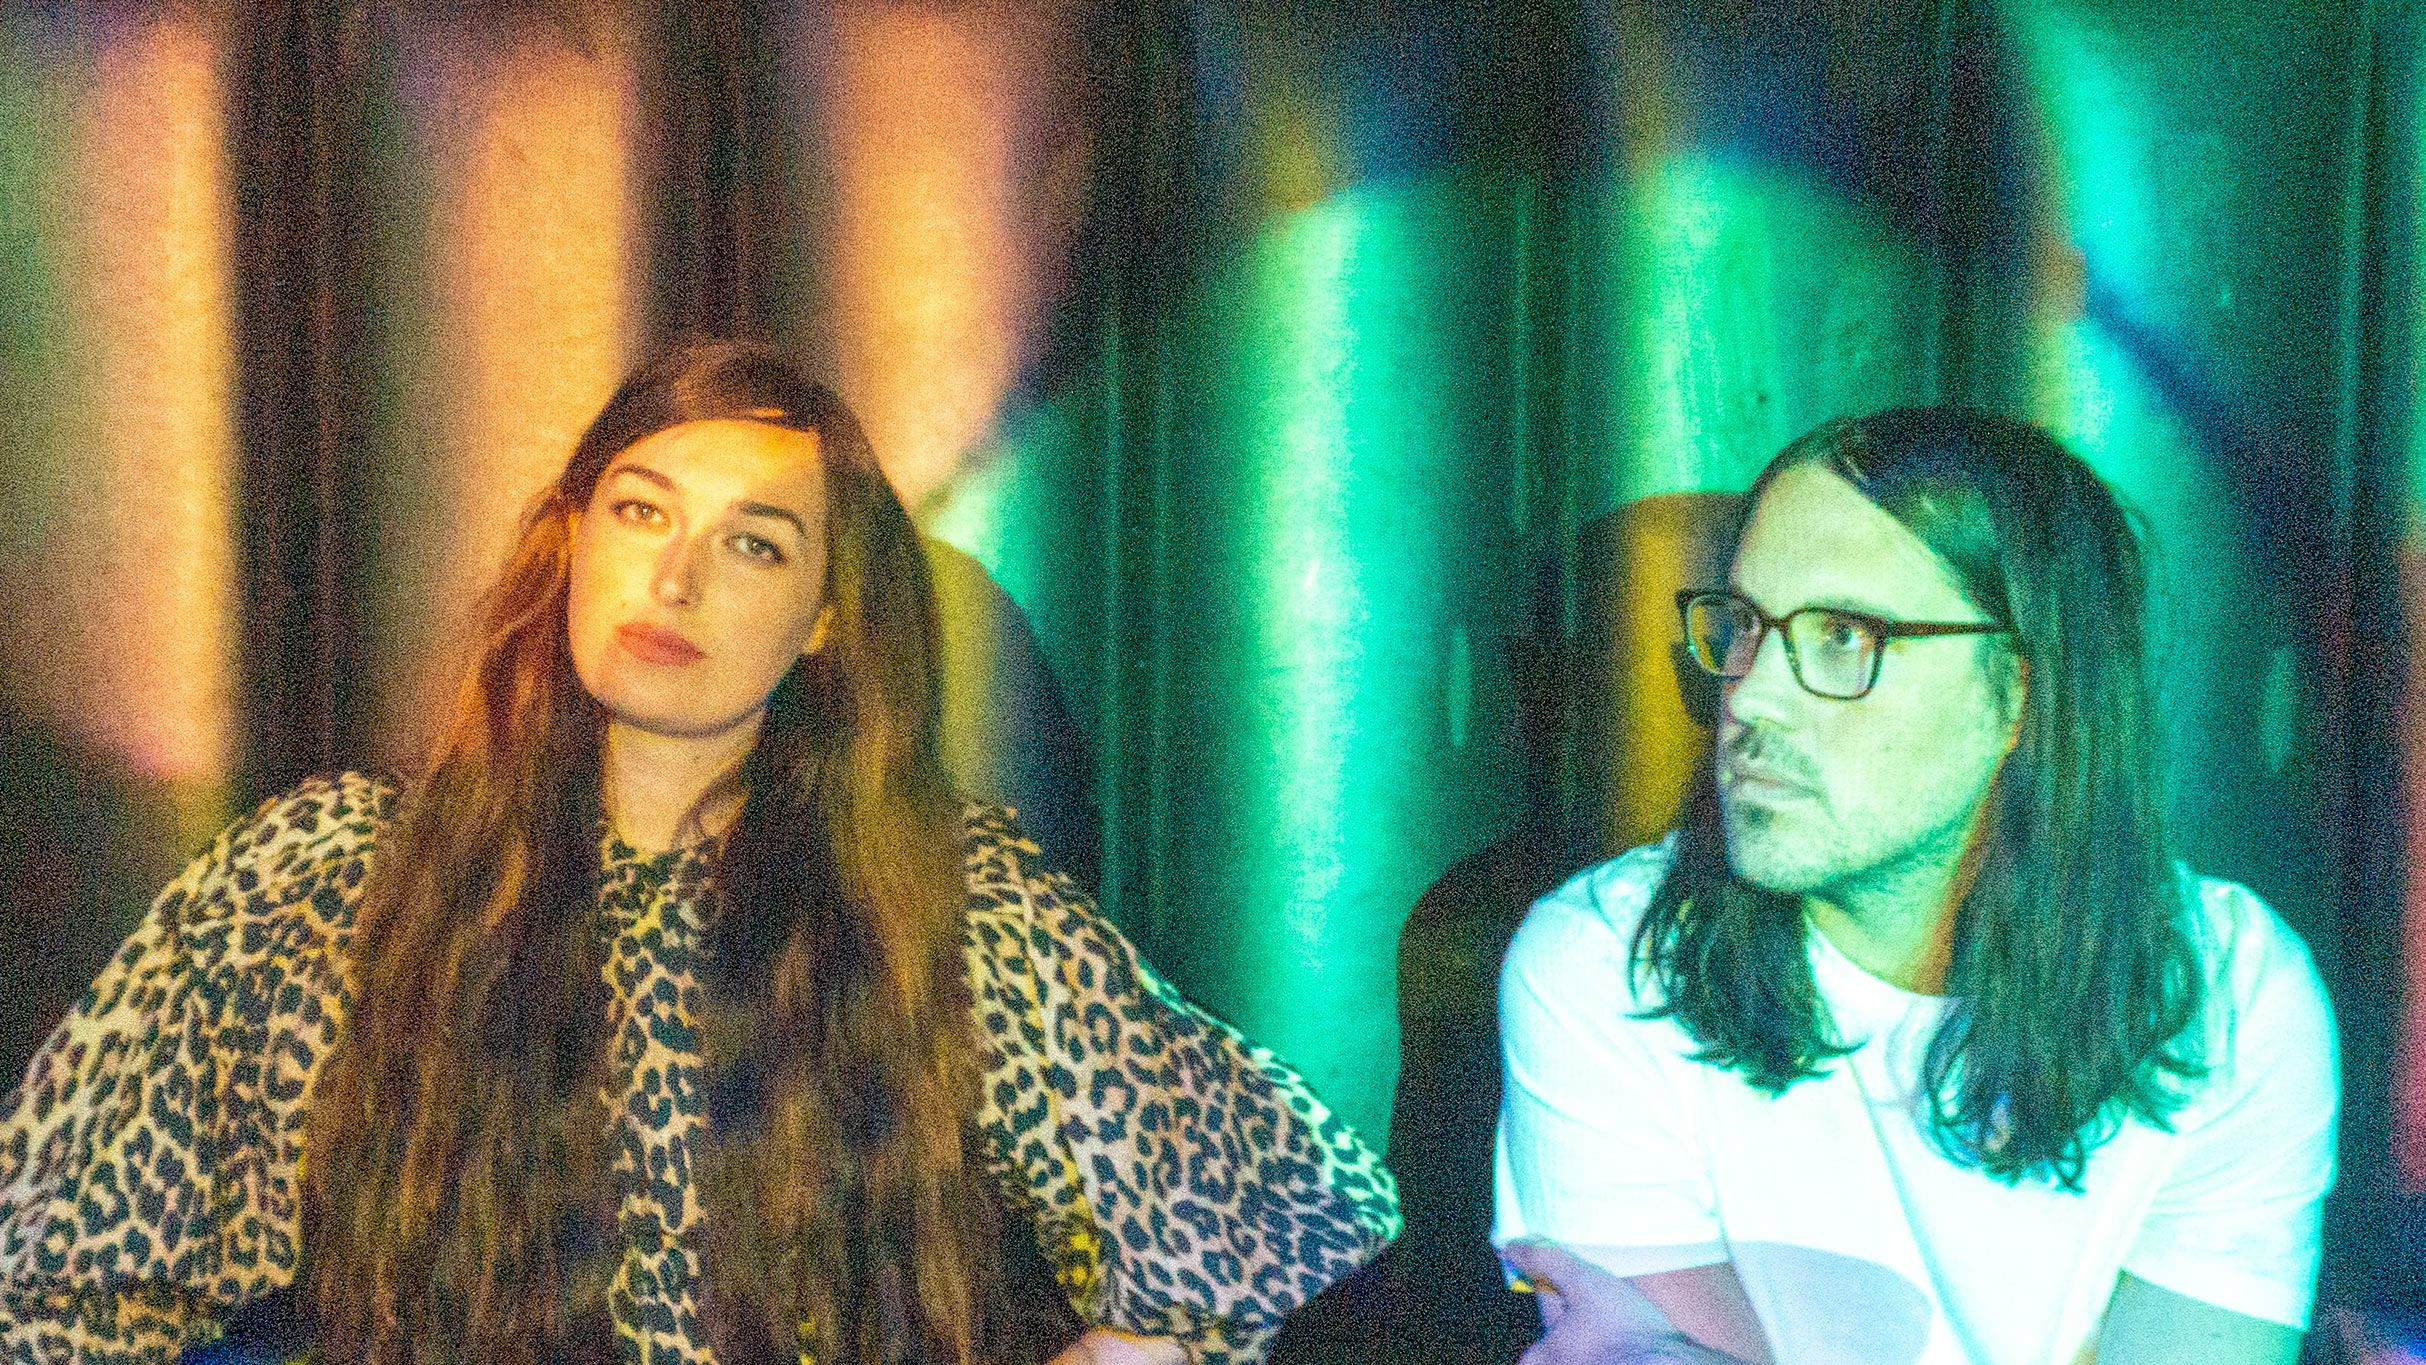 Cults presale password for advance tickets in San Diego